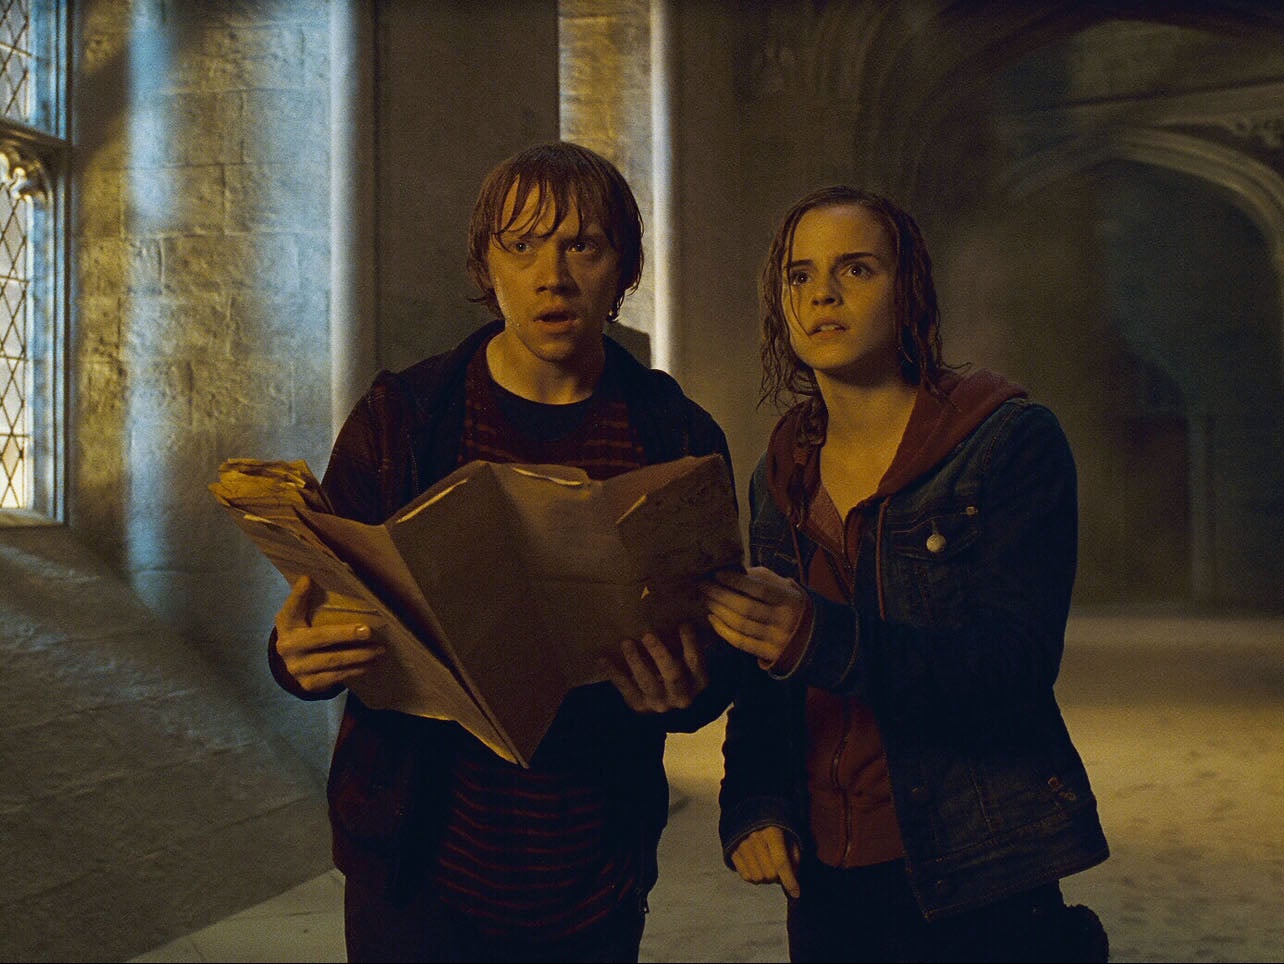 Rupert Grint and Emma Watson in Harry Potter and the Deathly Hallows, part 2